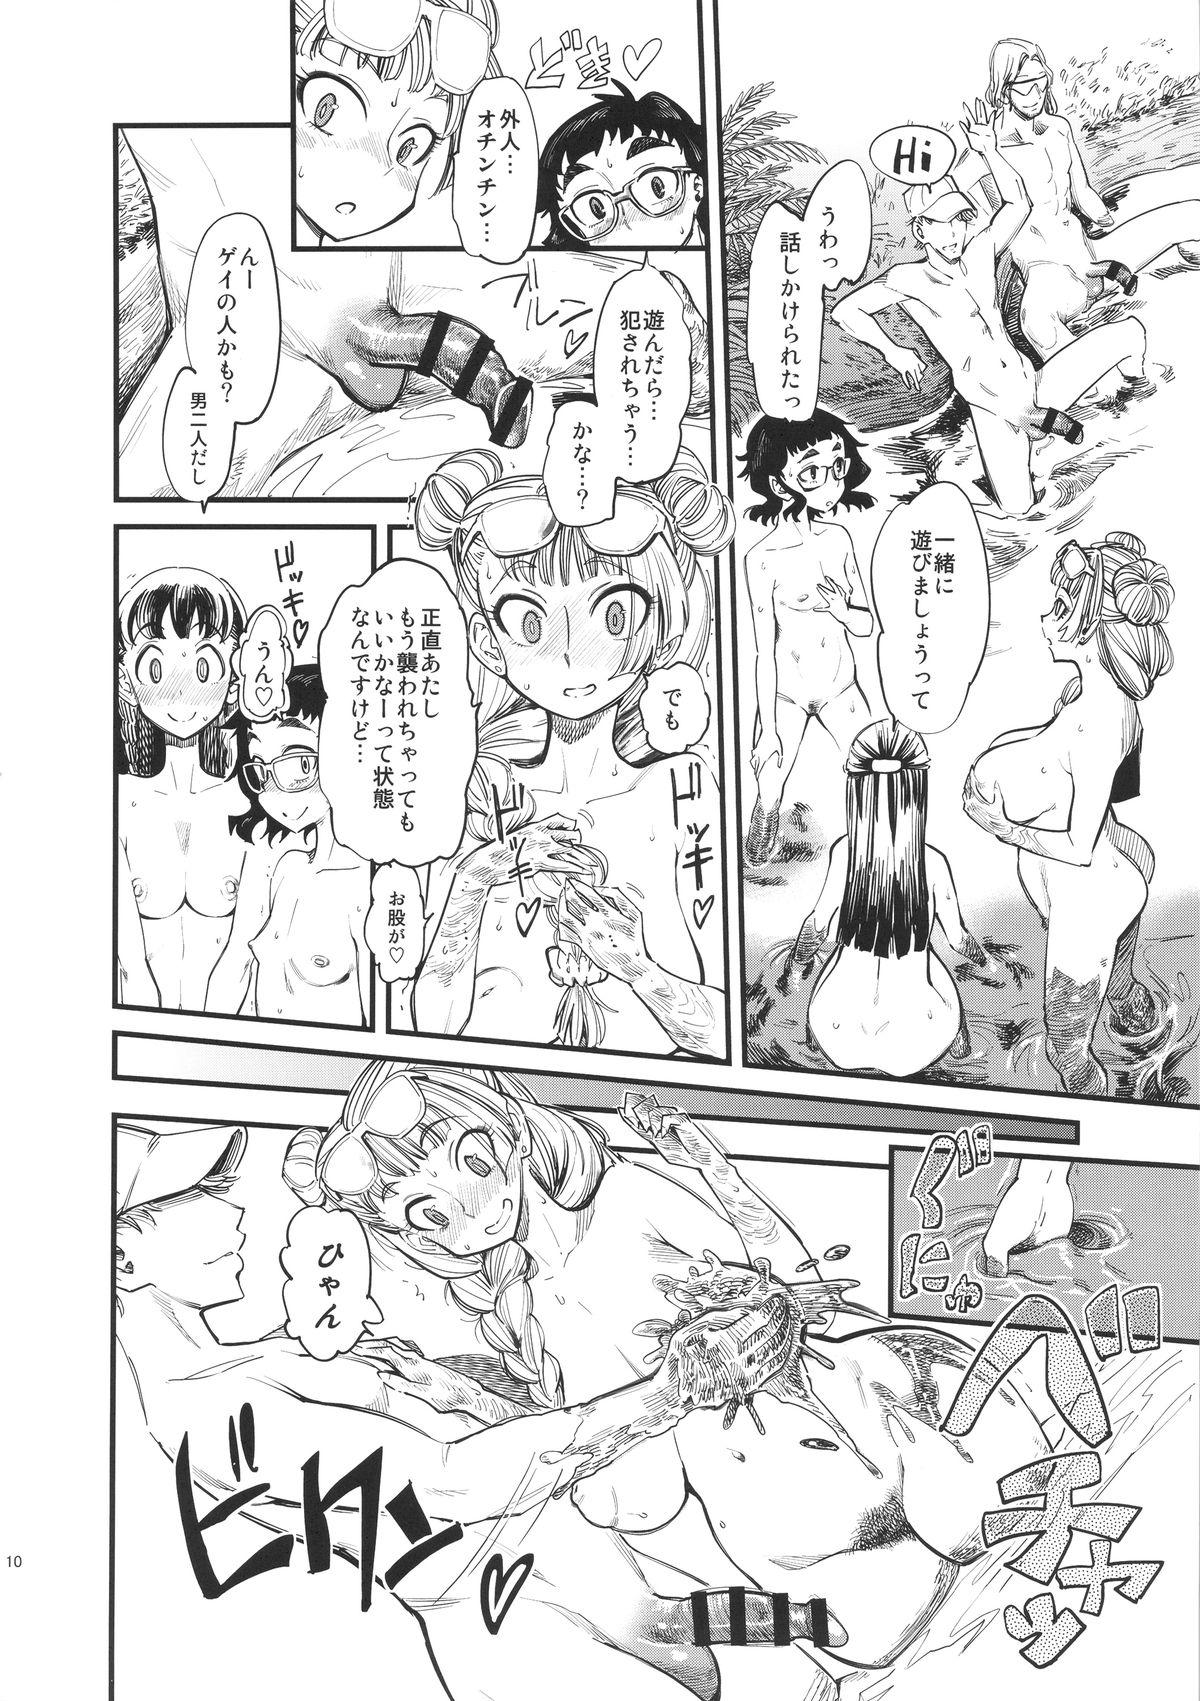 Babysitter NMB - Oshiete galko-chan Tamil - Page 11